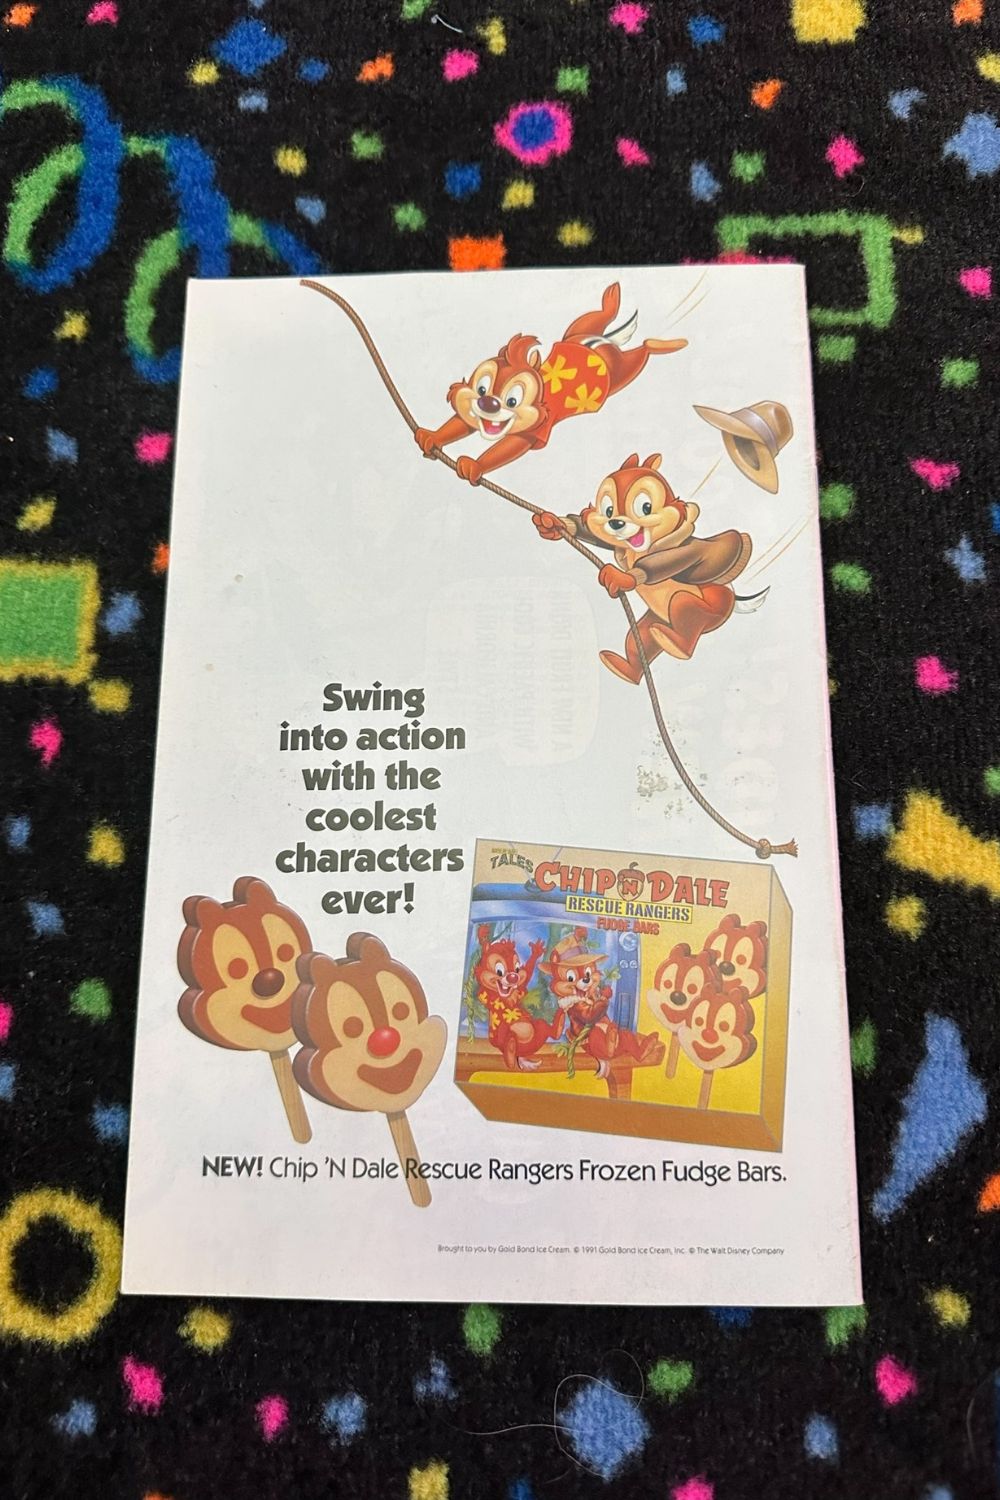 MICKEY MOUSE ADVENTURES COMIC BOOK*